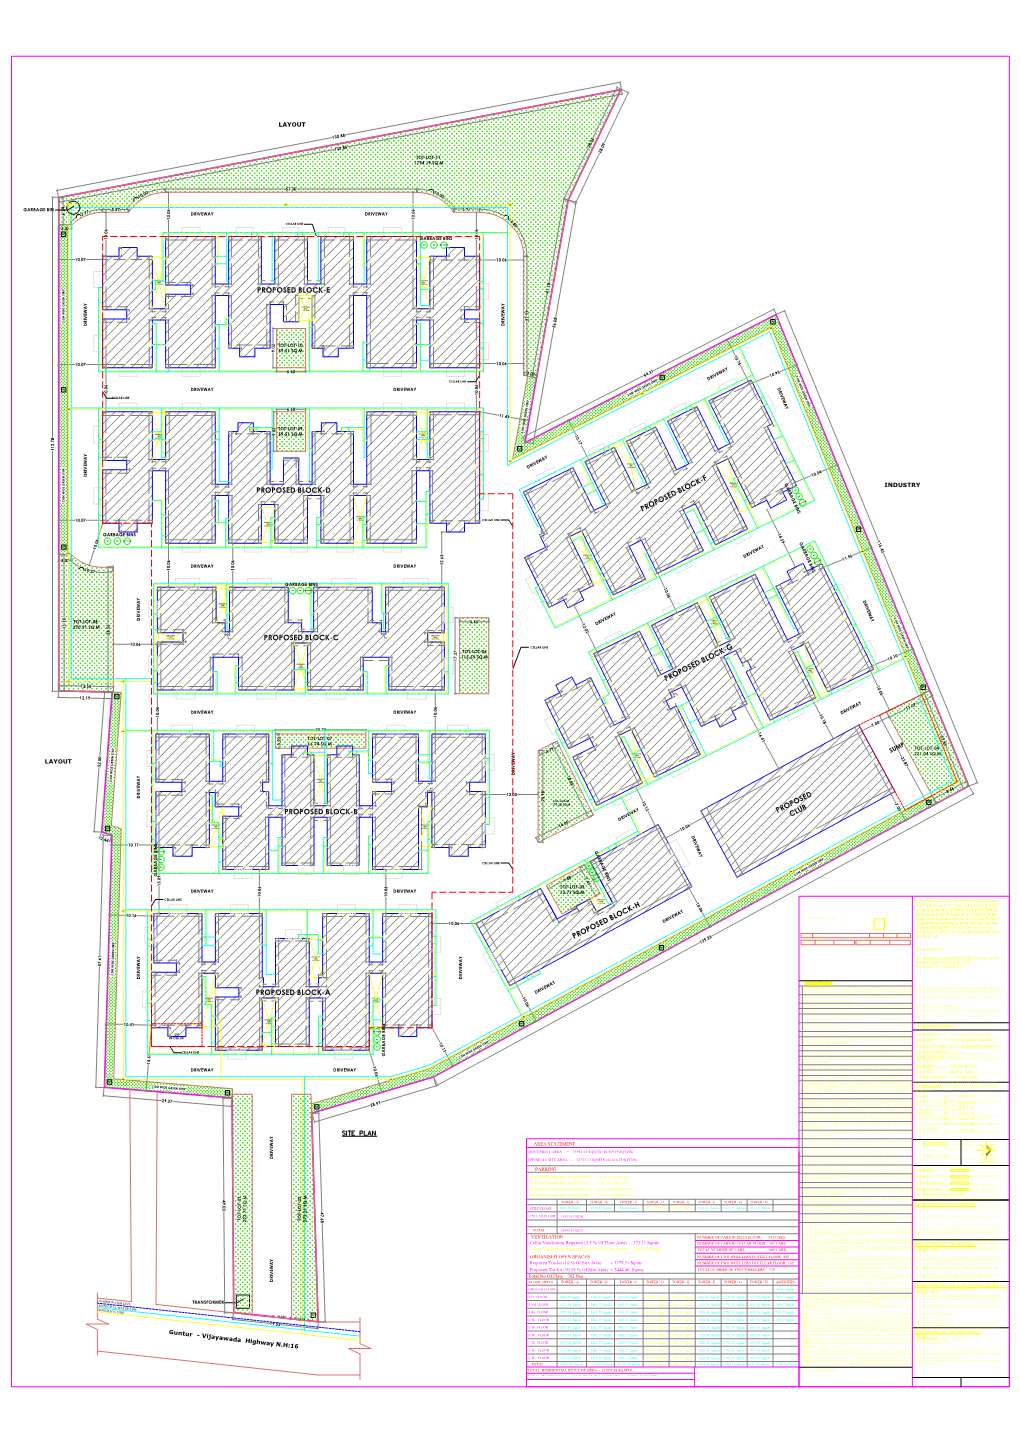 3549.35 Sq.Mts Parking Area- 28080.50 Sq.Mts Total Build up Area Is - 145601.8 Sq